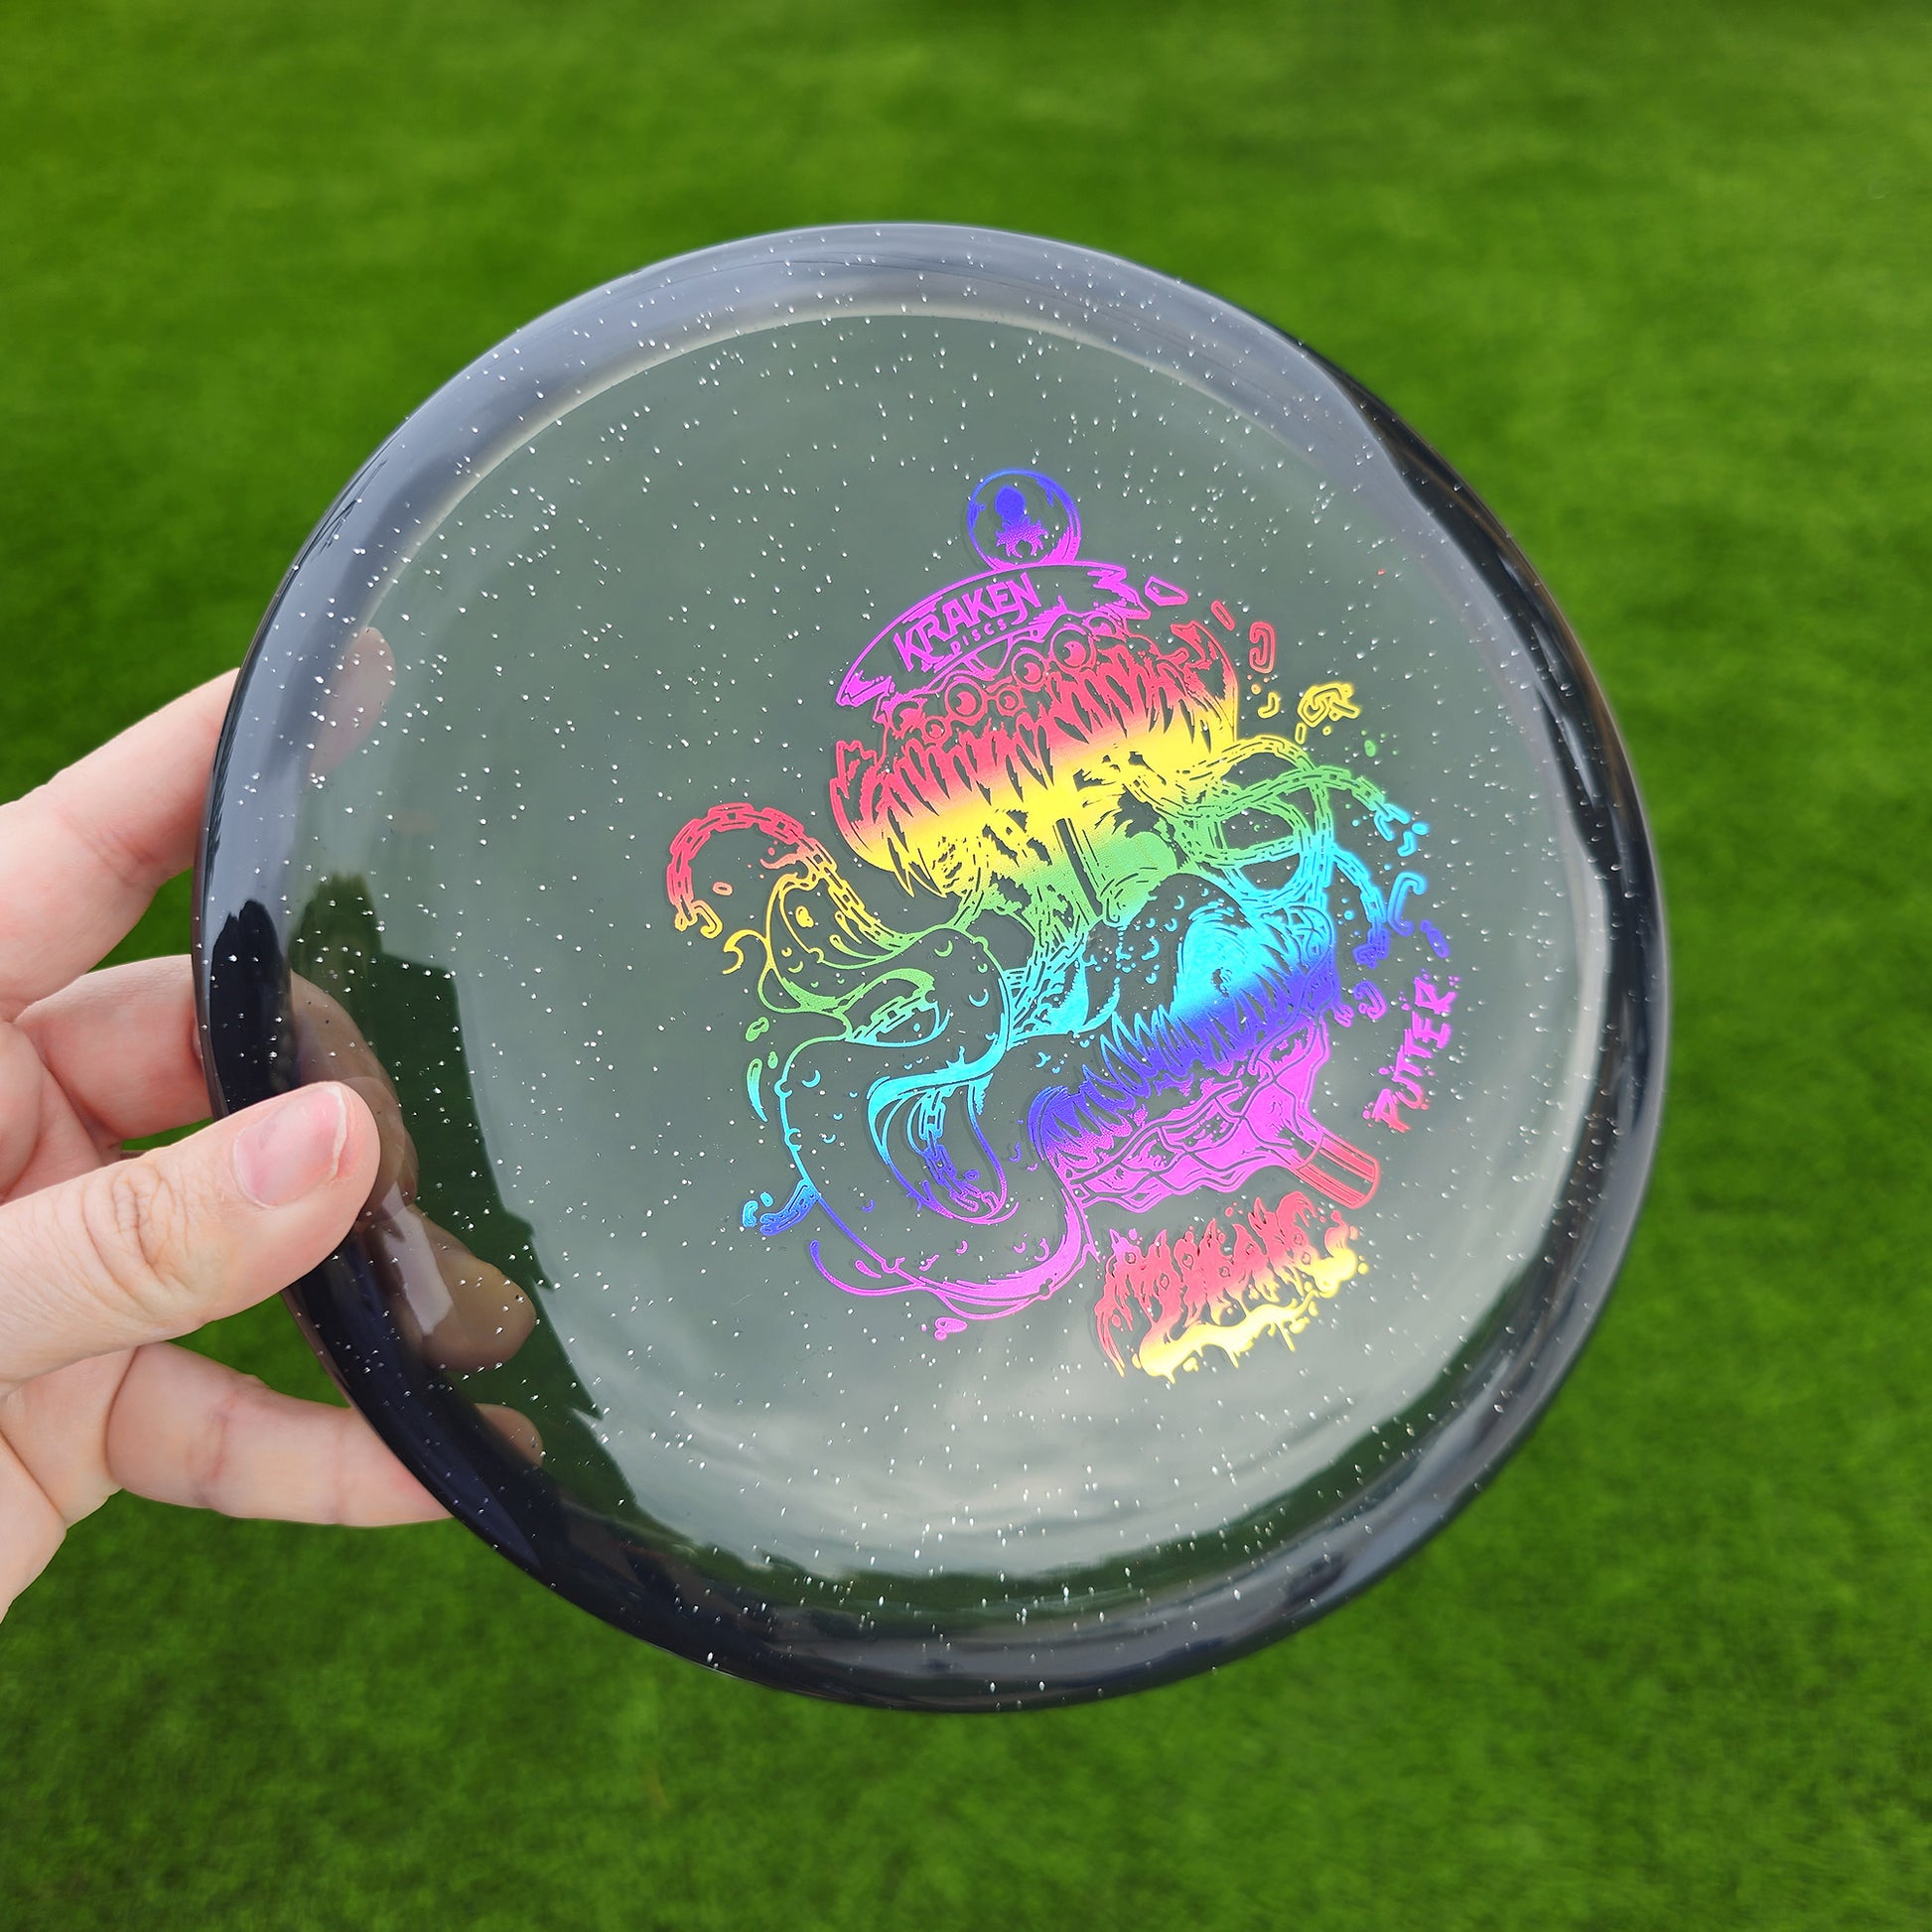 Mimic Black Jelly Putter with Rainbow Foil